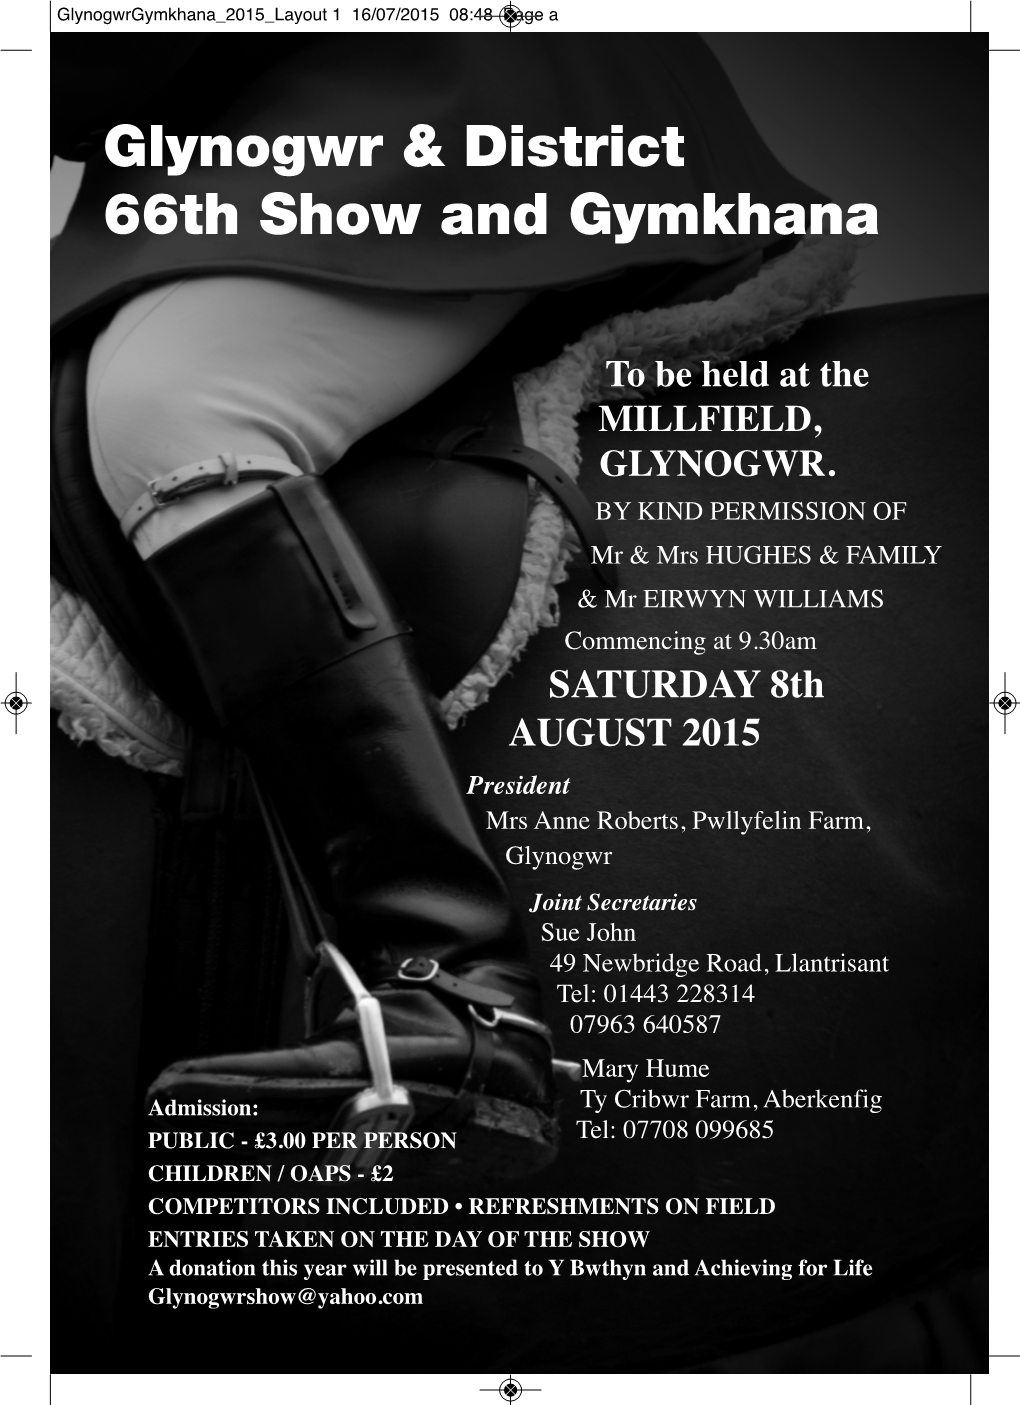 Glynogwr & District 66Th Show and Gymkhana